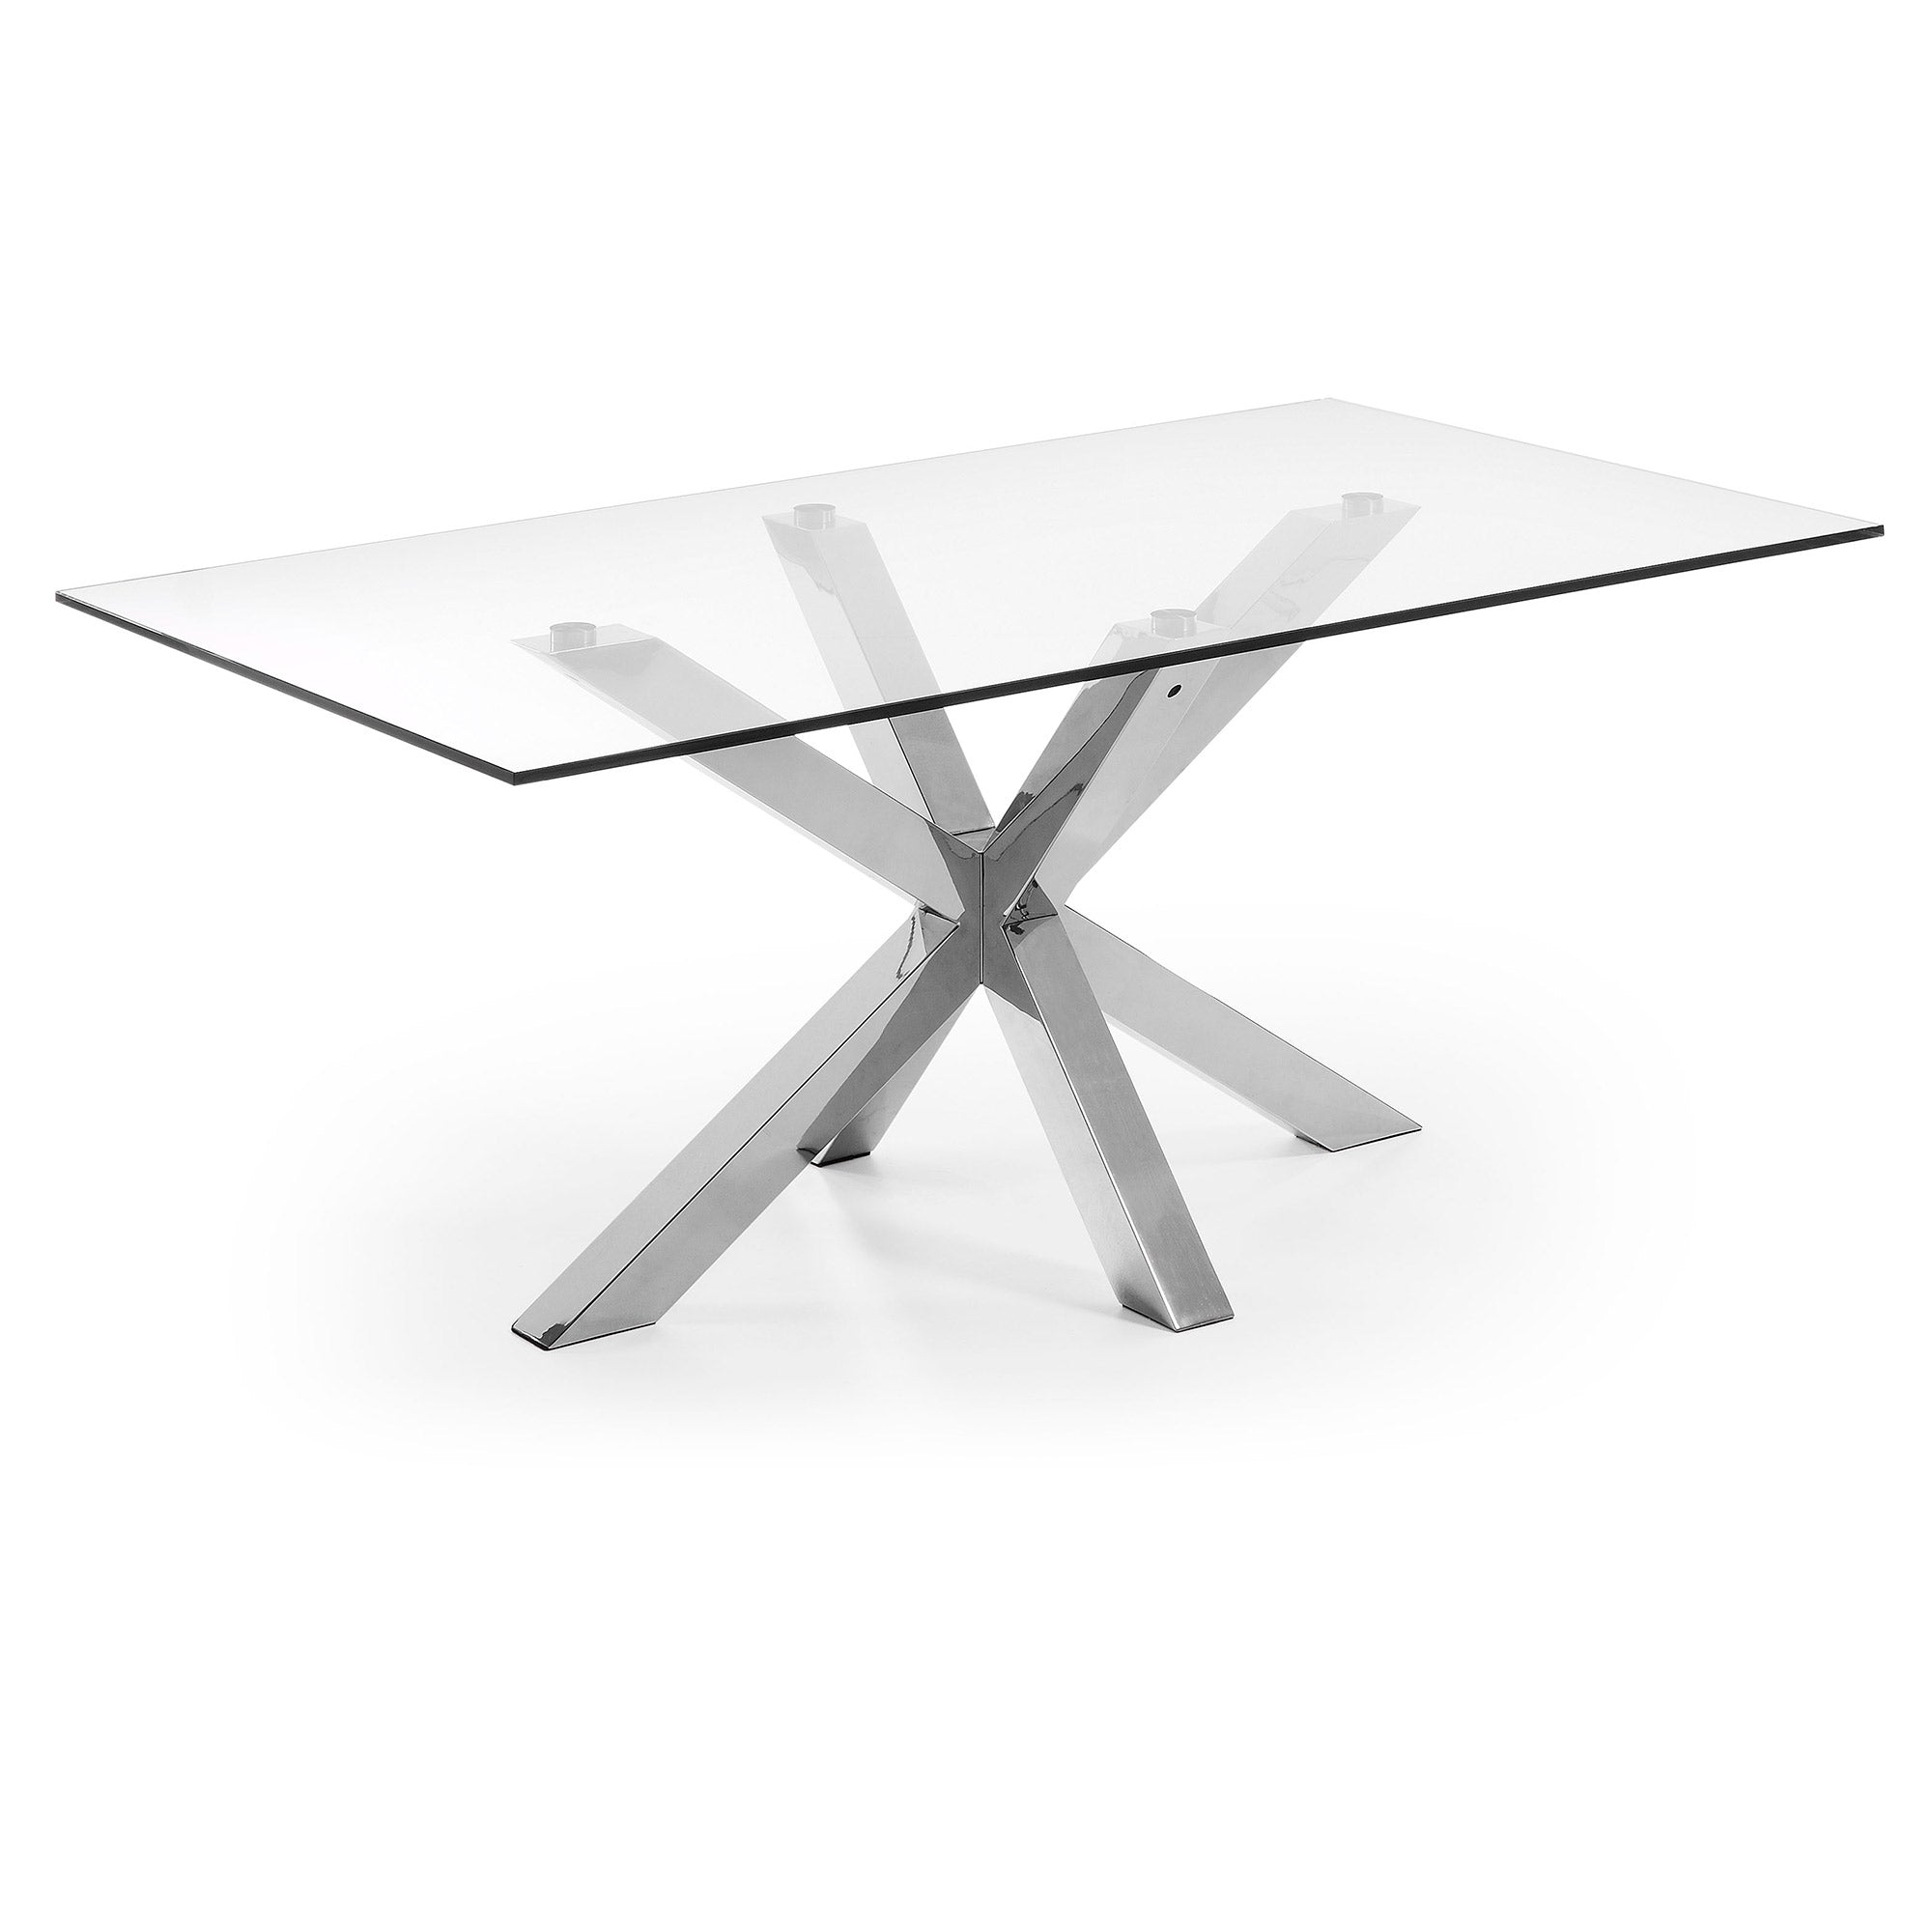 Argo glass table with stainless steel legs 160 x 90 cm